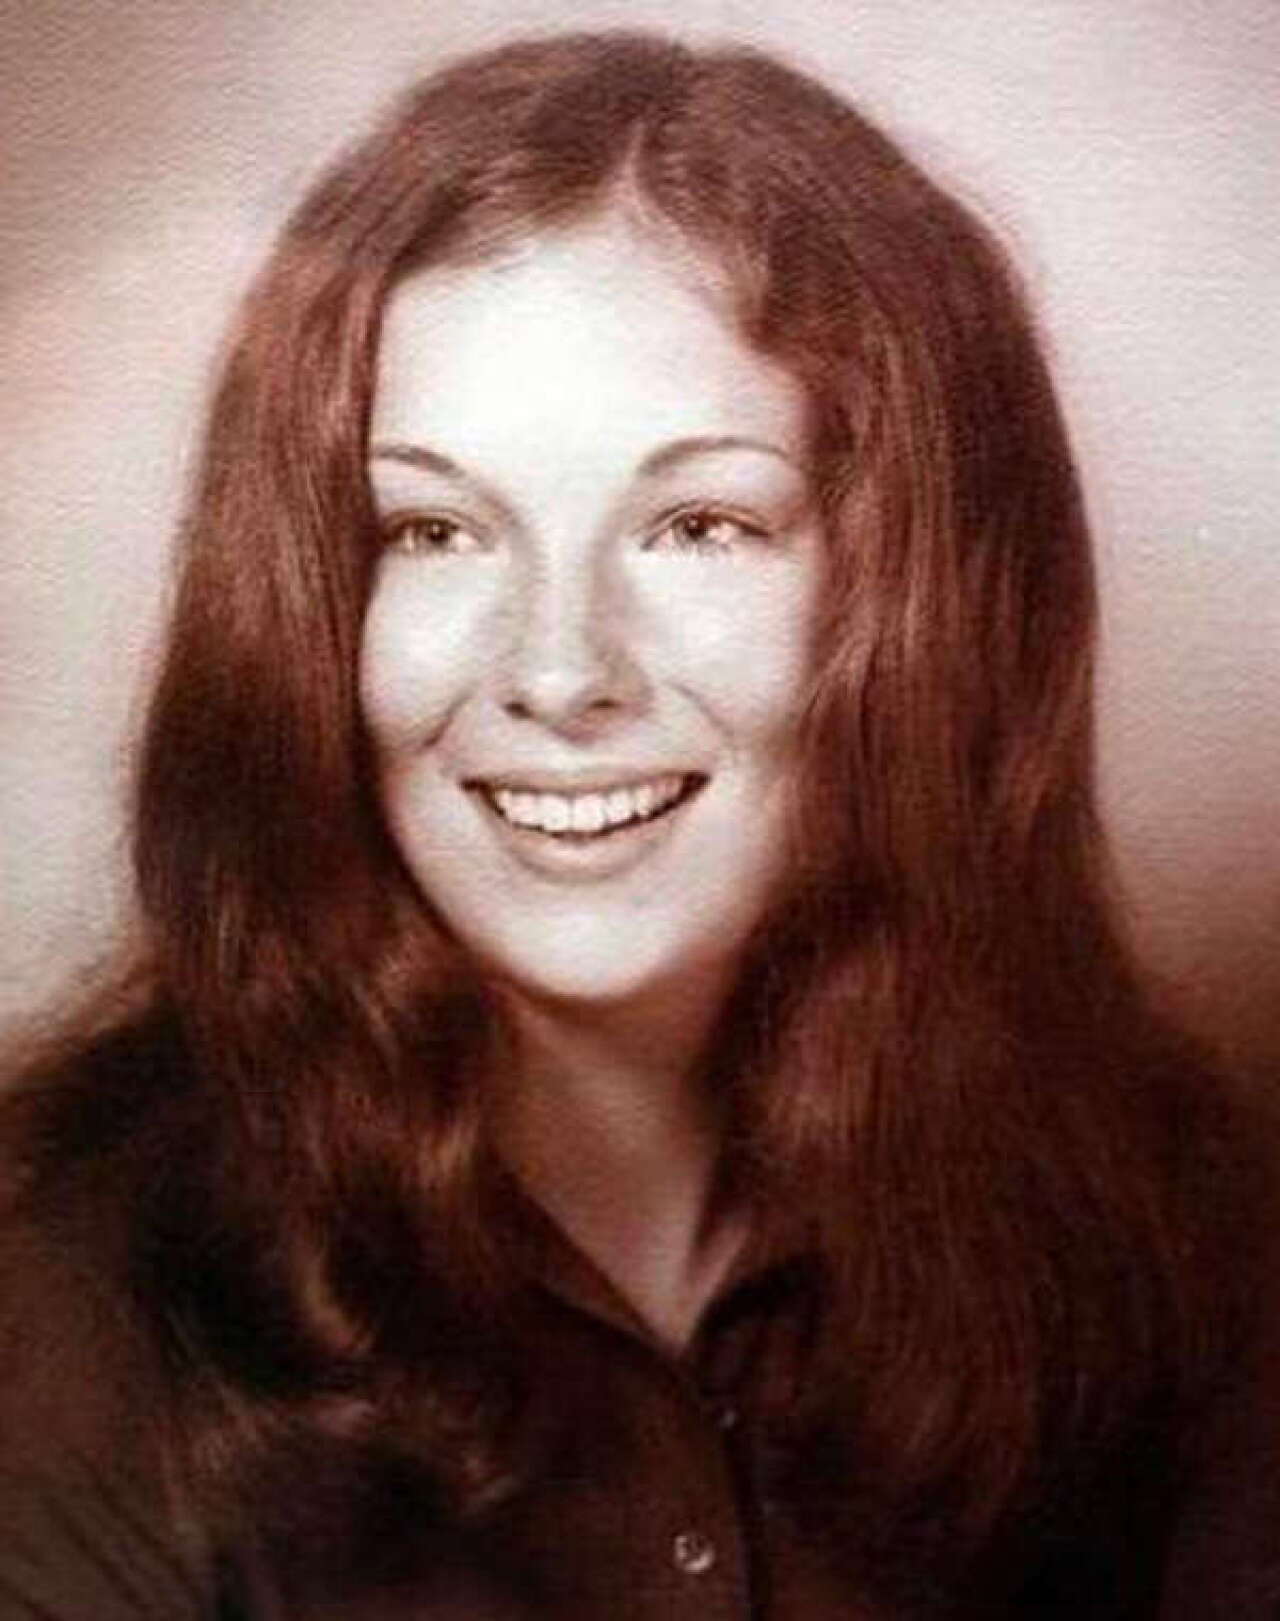 [IMAGE] Pa. Teen Was Murdered After Coming Home from Grocery Store in 1975, Coffee Cup Leads to Arrest